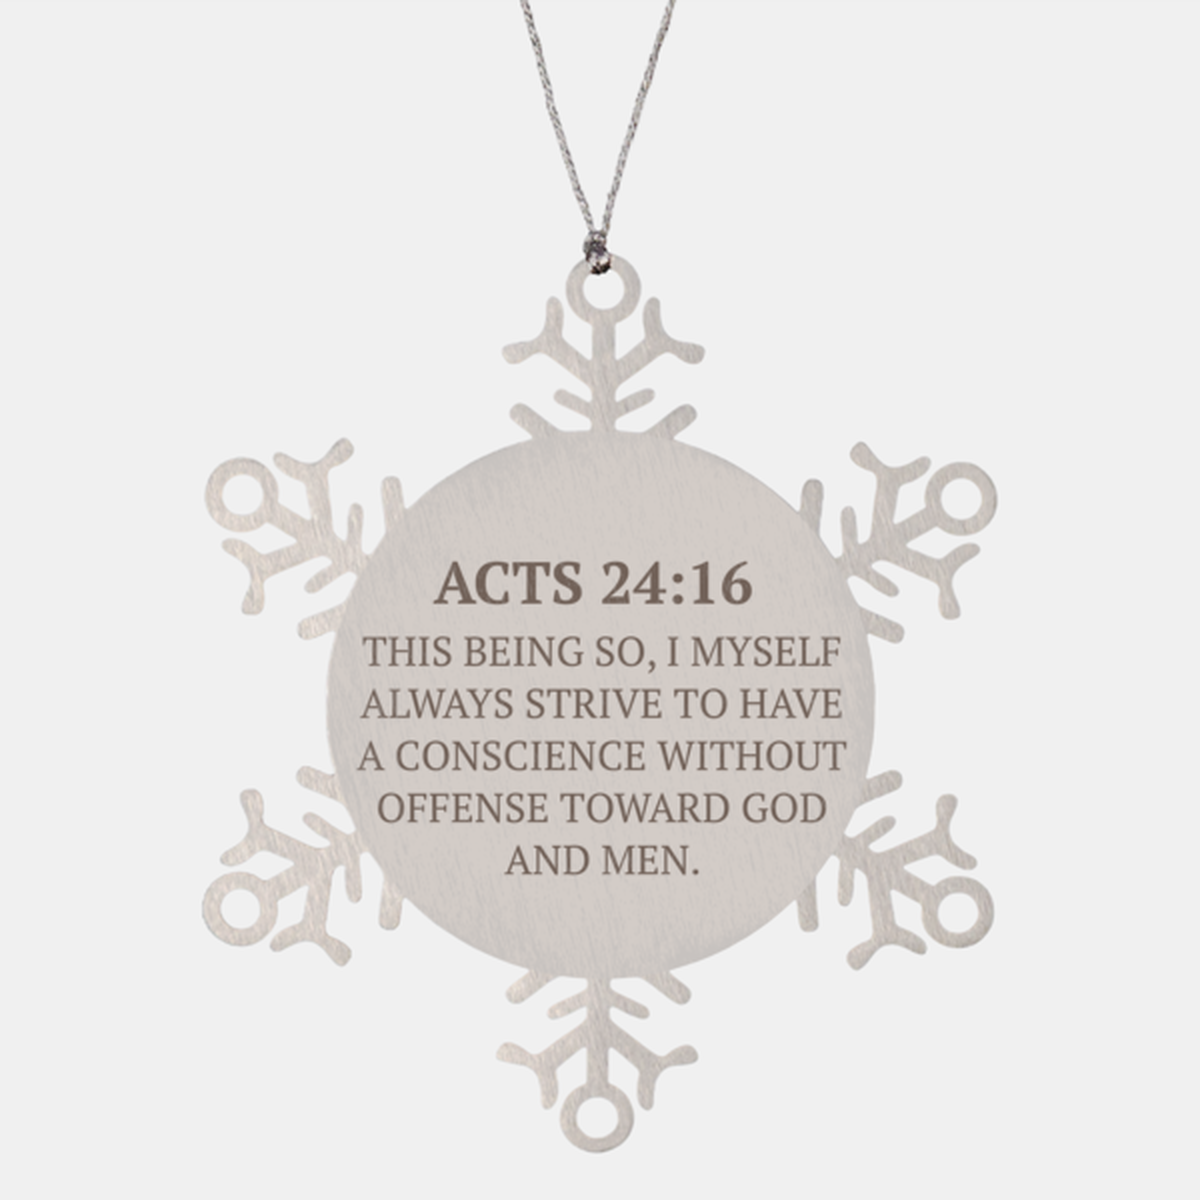 Christian Ornaments For Christmas Tree, This Being So, I Myself Always Strive To Have, Religious Christmas Decorations, Scripture Ornaments Gifts, Bible Verse Ornament